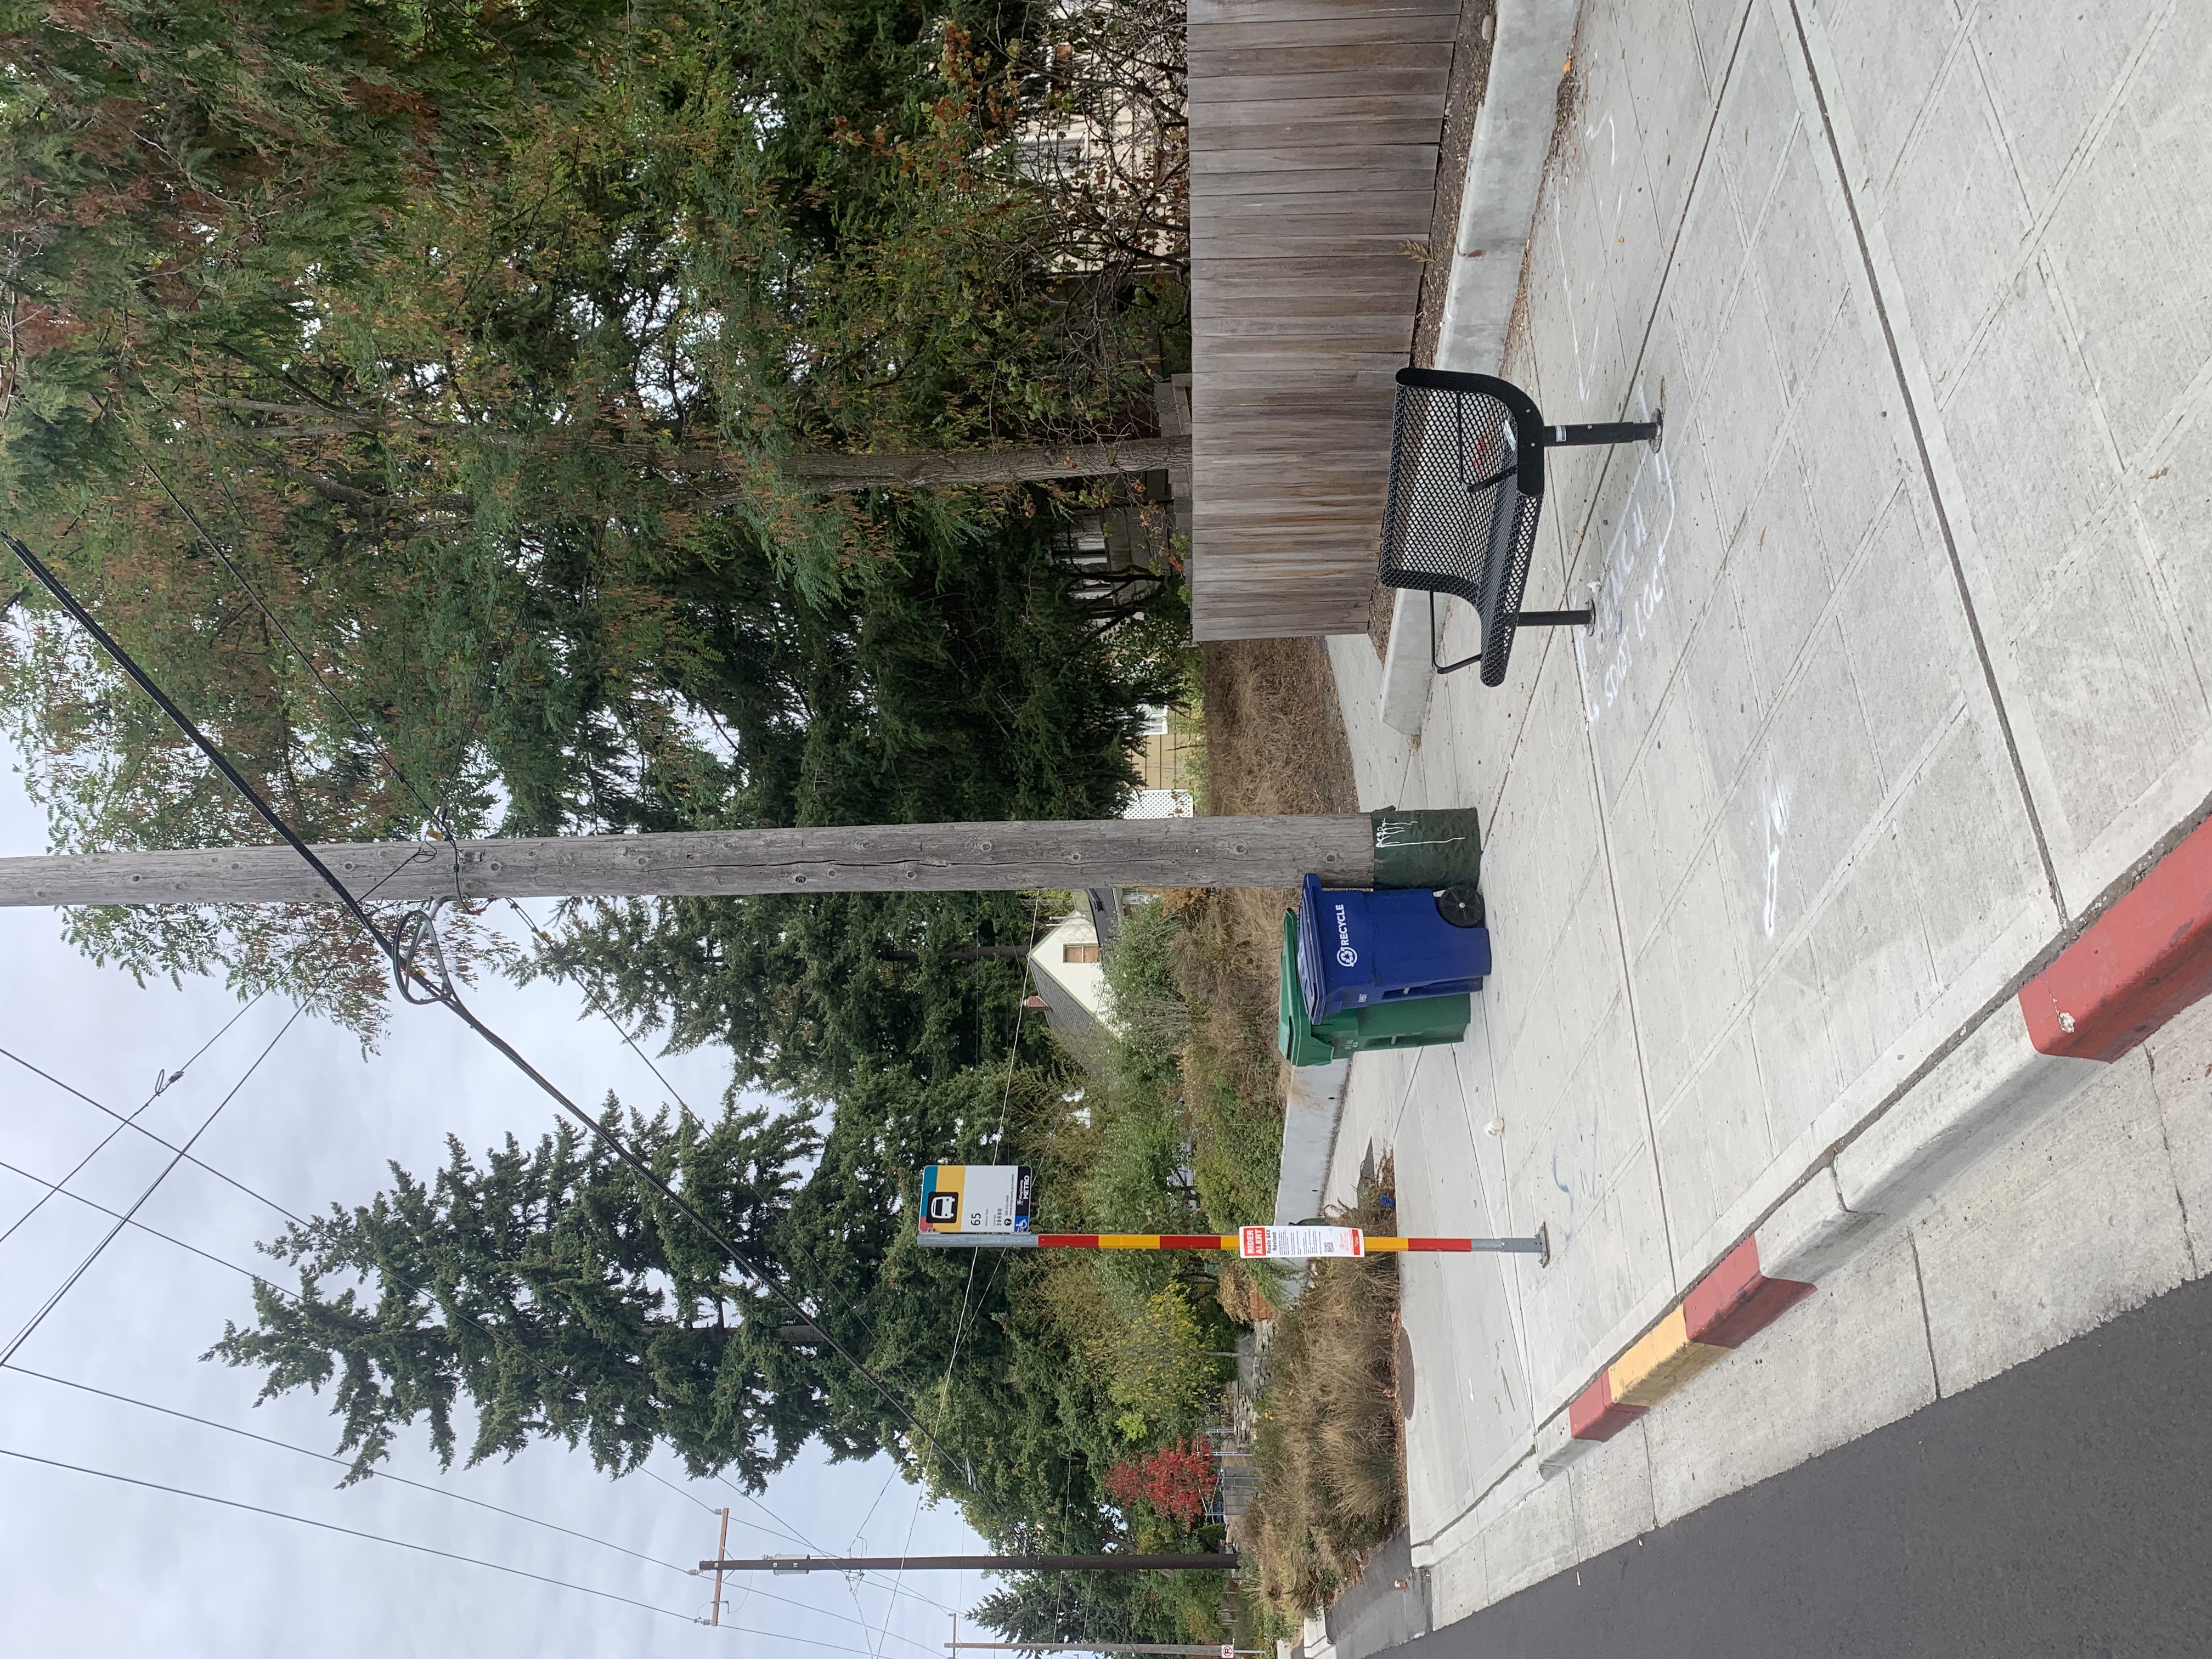 New bench located at a bus stop at 30th Ave NE & NE 130th St